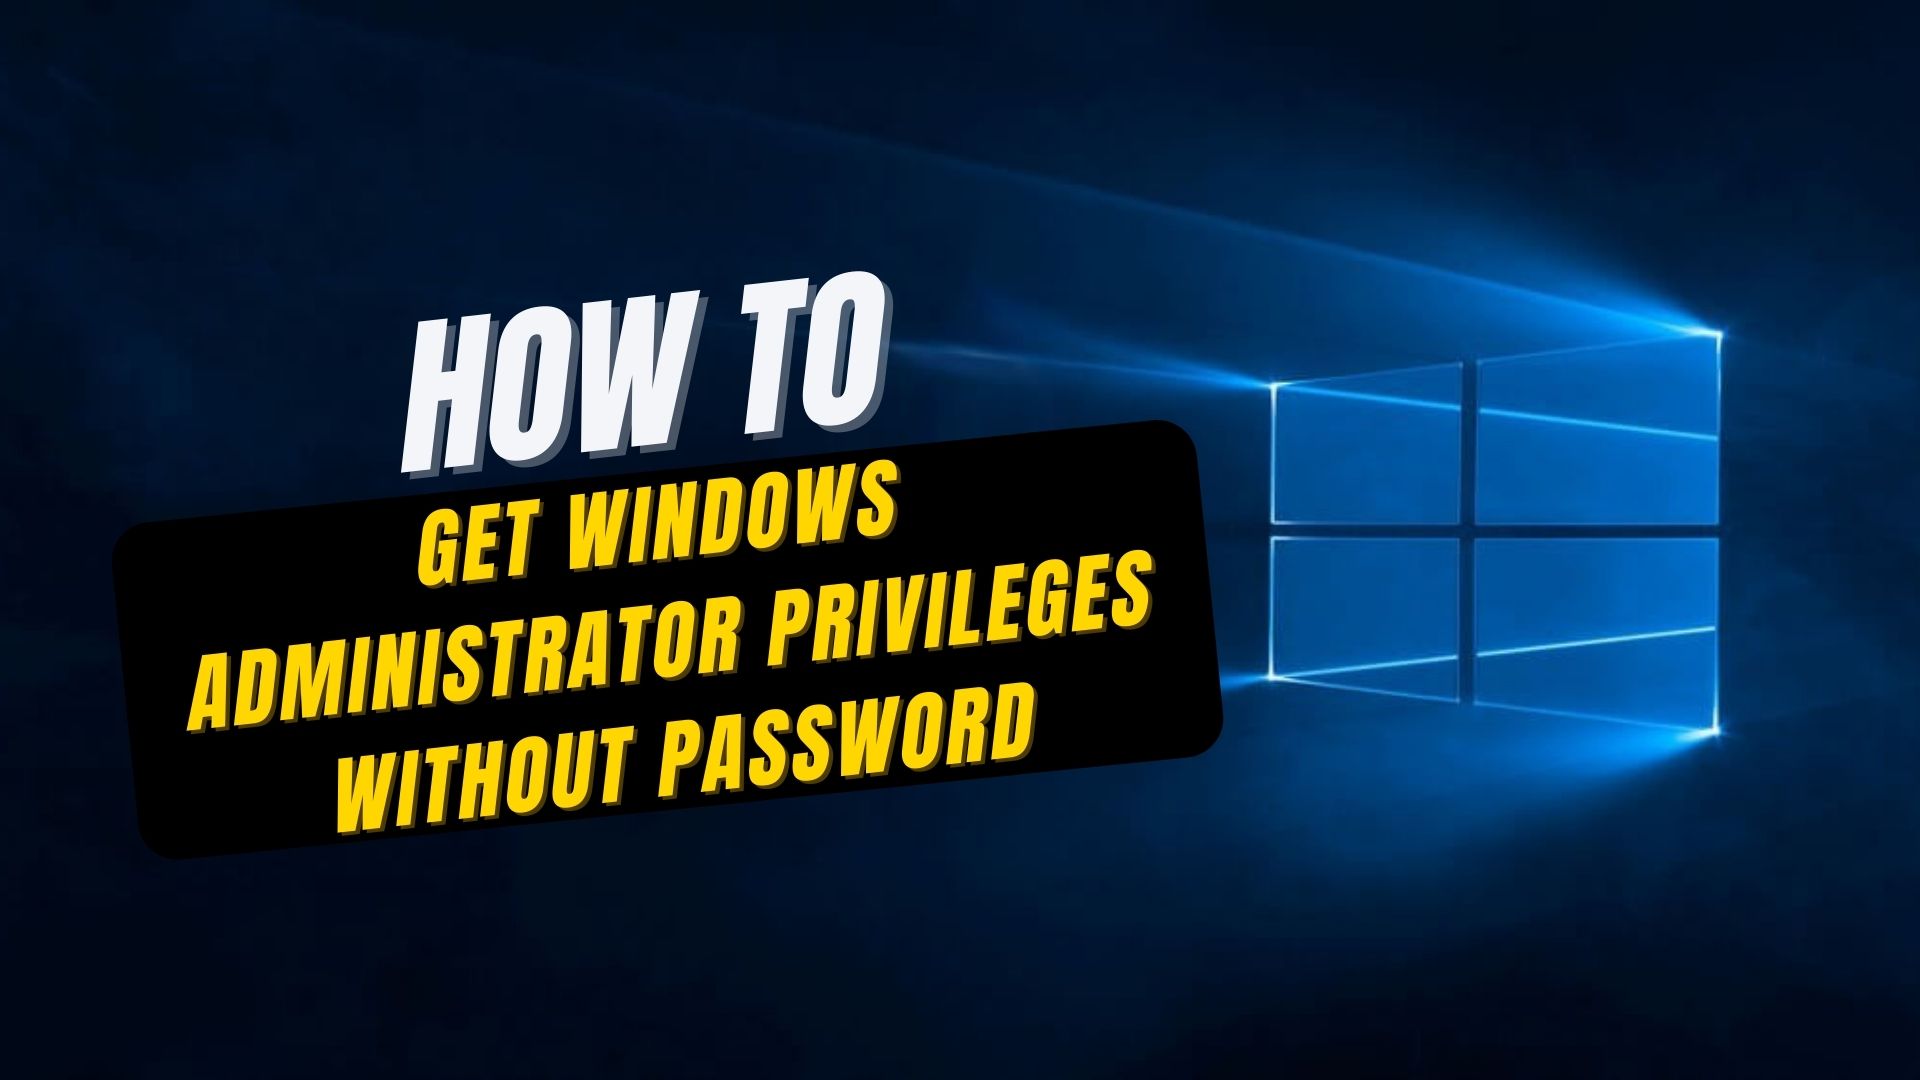 Get Windows Administrator Privileges without Password